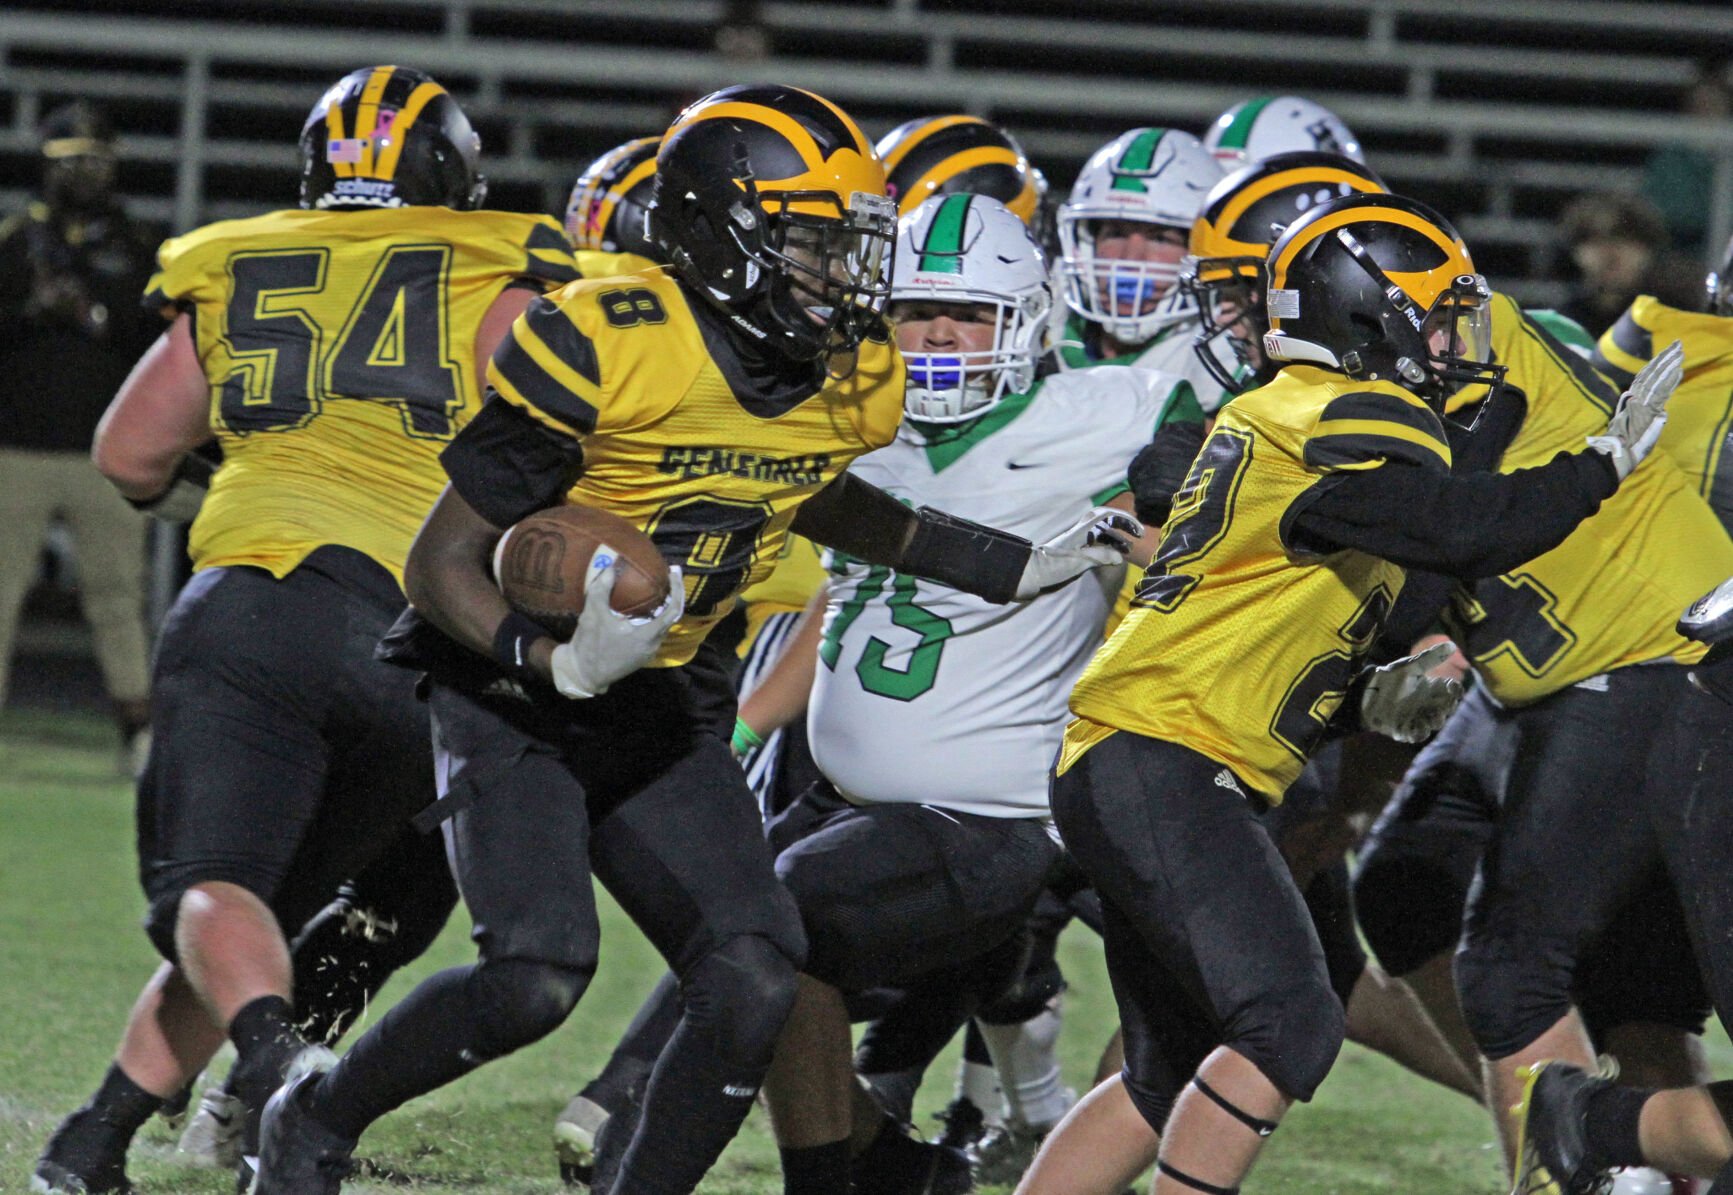 Triton Central Tigers Dominate Clarksville Generals with 41-6 Victory